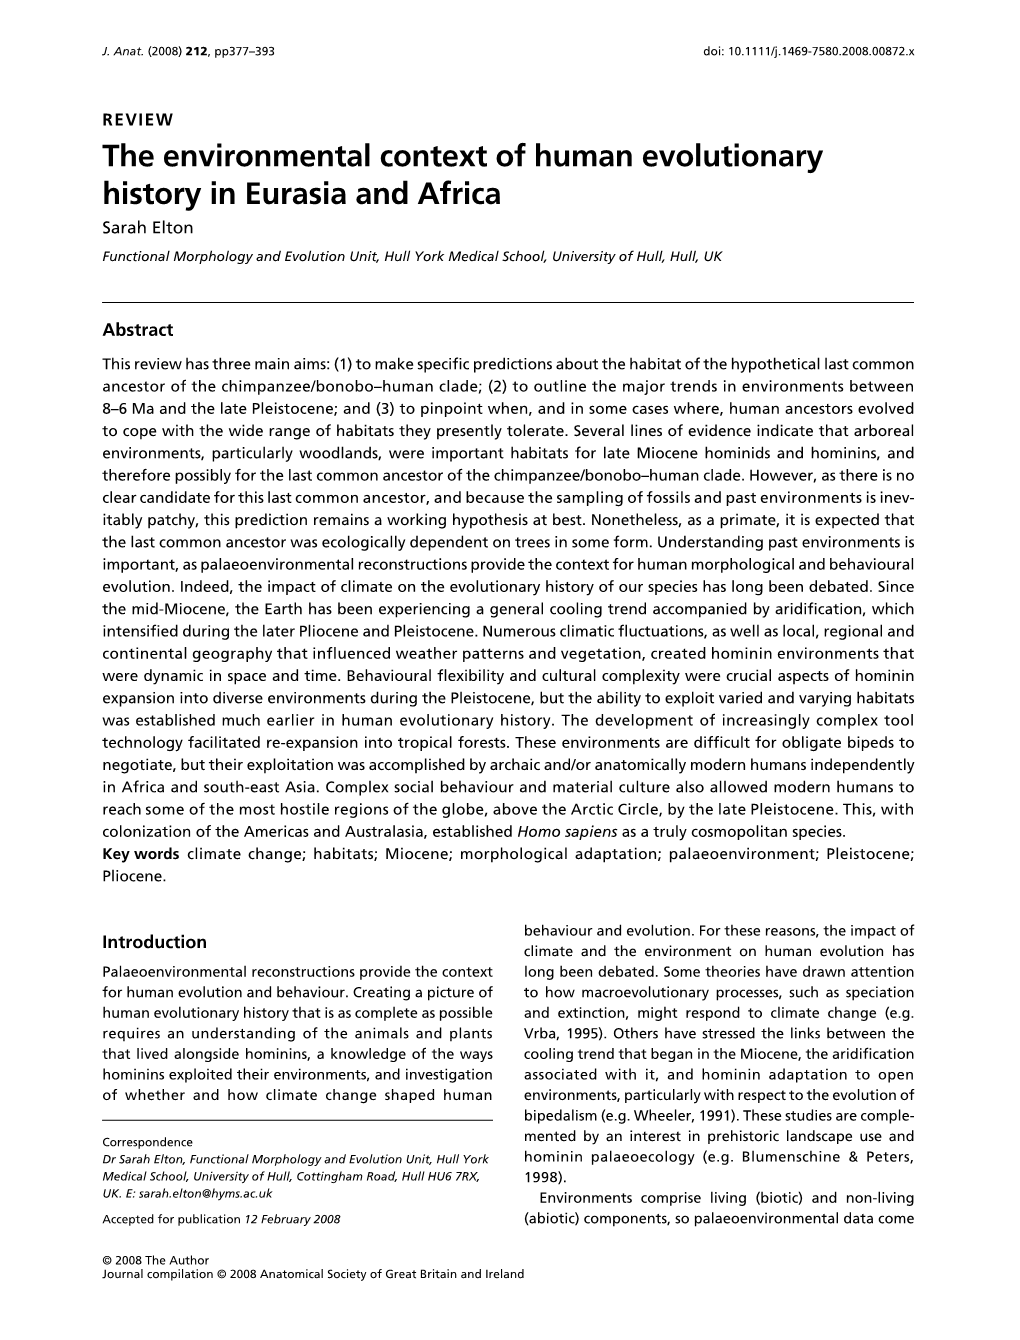 The Environmental Context of Human Evolutionary History in Eurasia and Africa